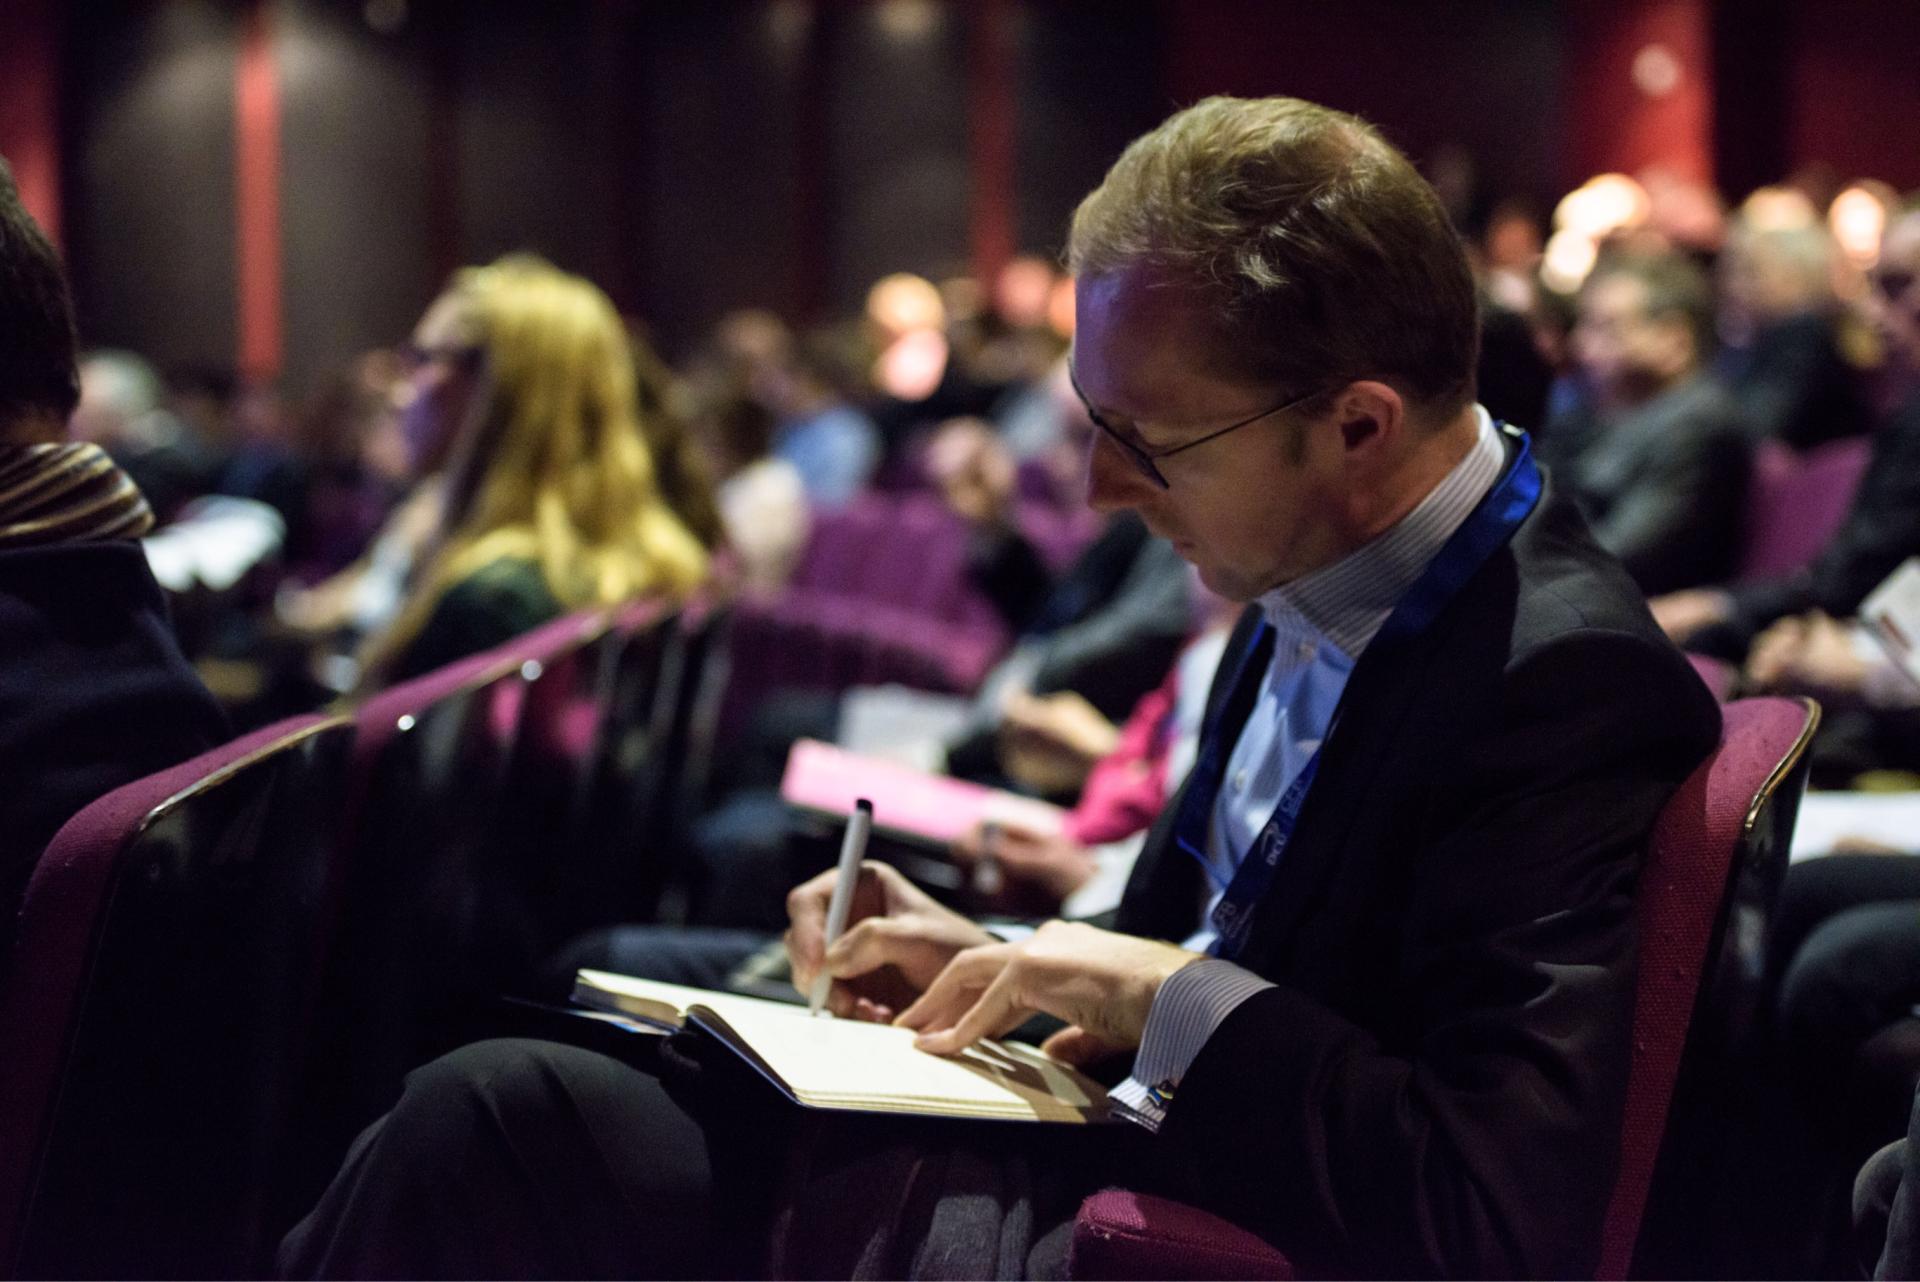 Man taking notes at conference